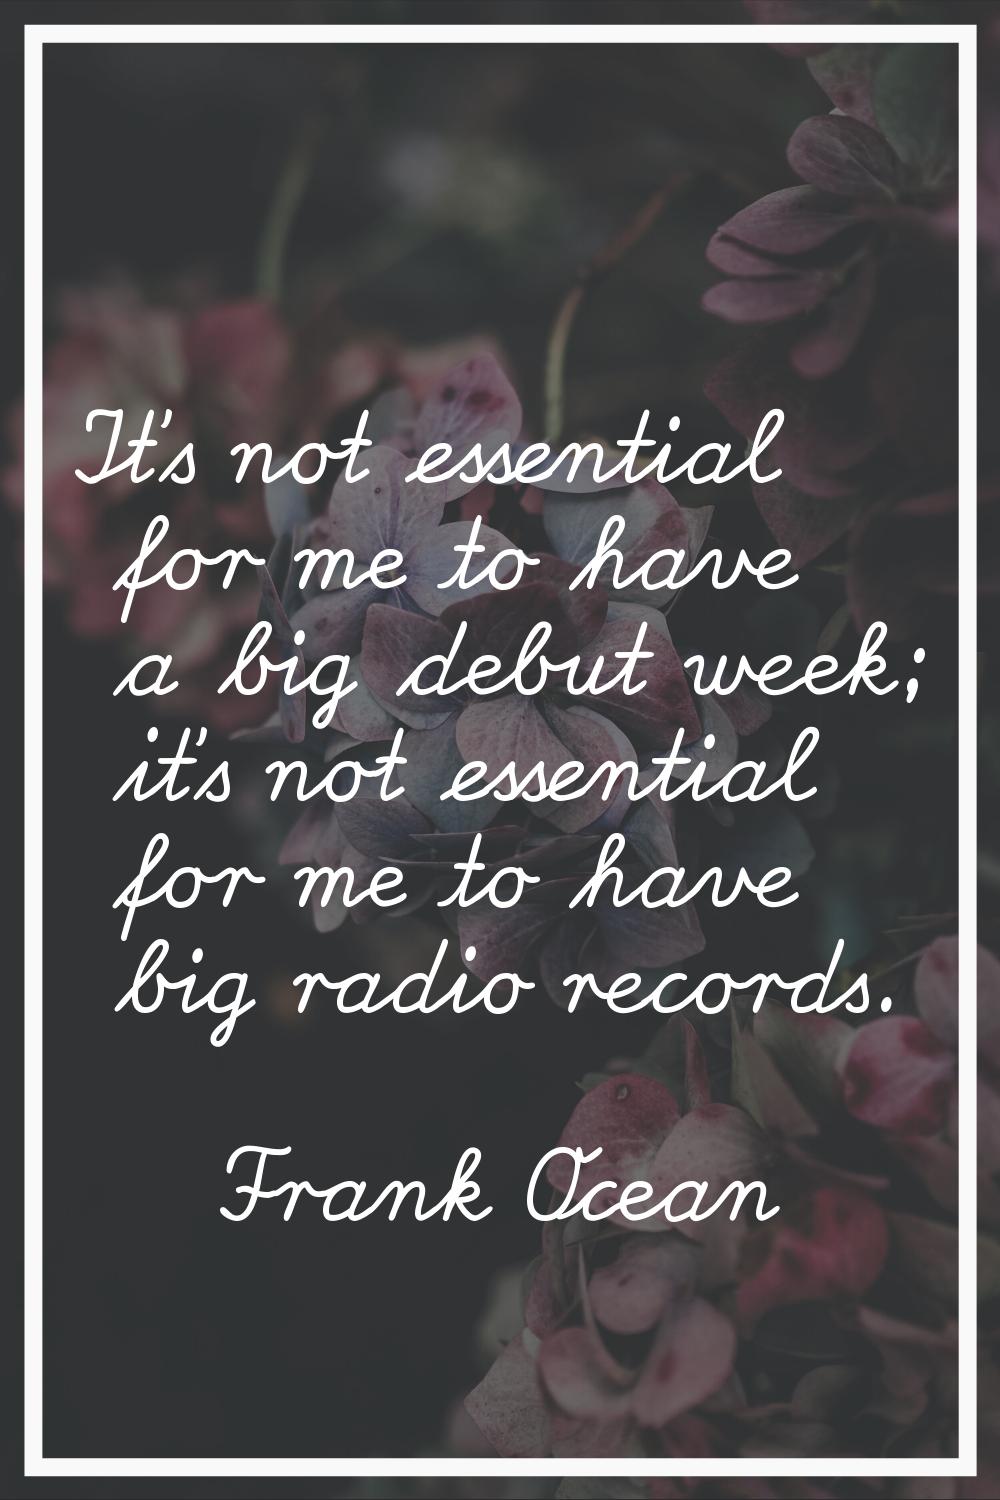 It's not essential for me to have a big debut week; it's not essential for me to have big radio rec